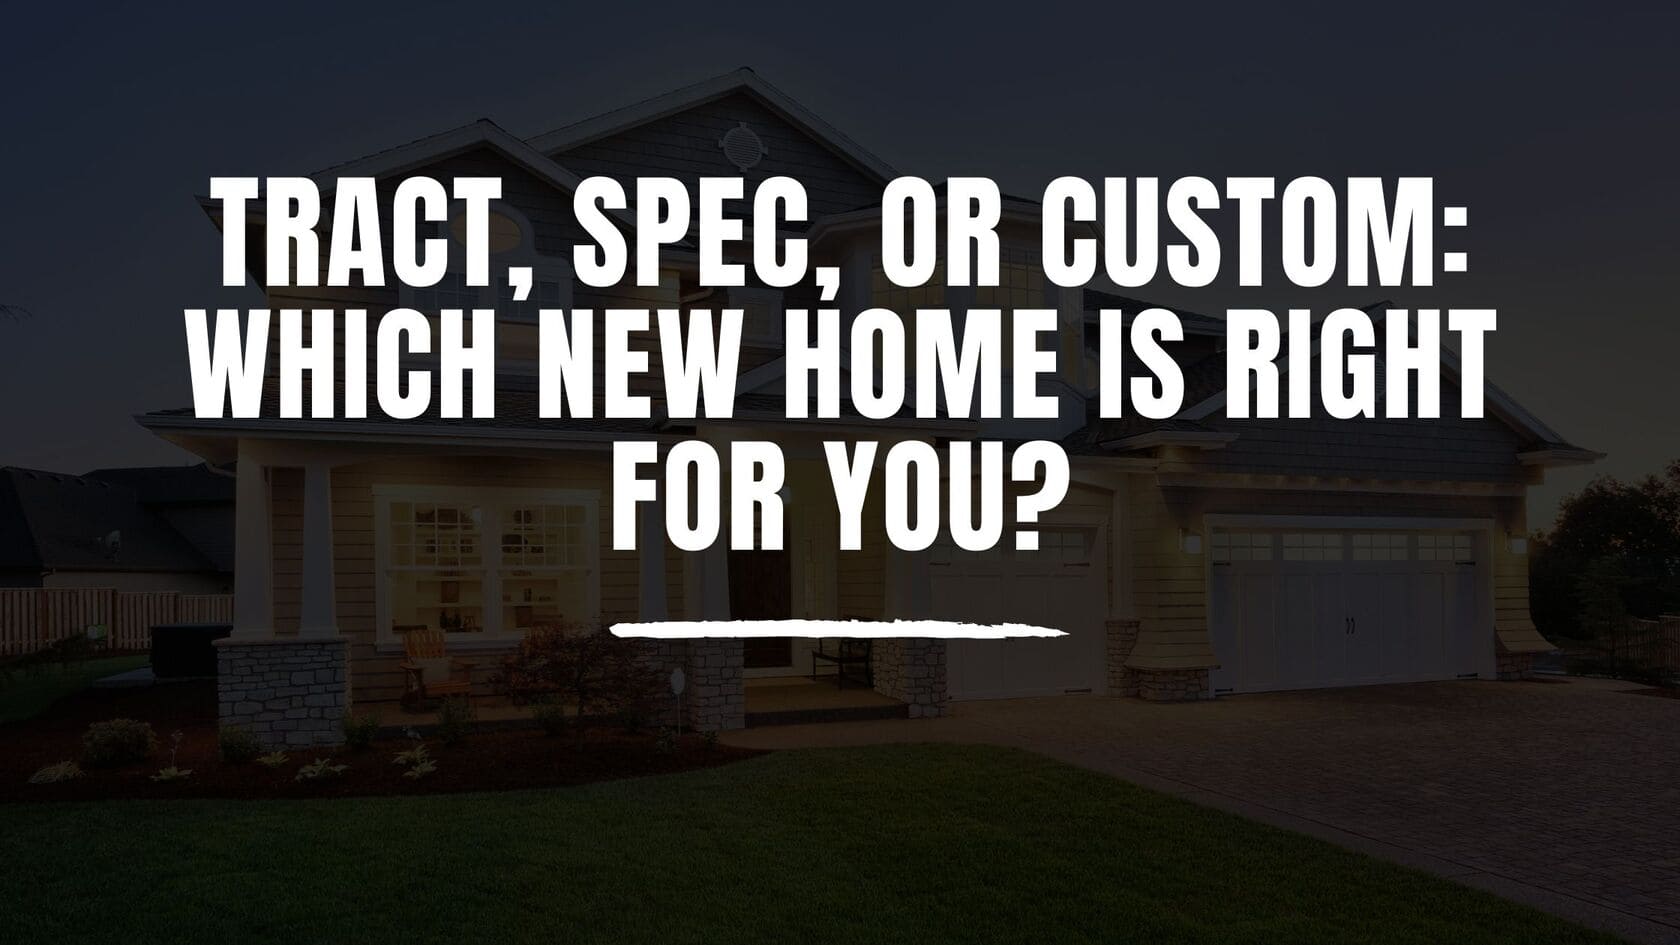 Tract, Spec, or Custom: Which New Home Is Right For You?